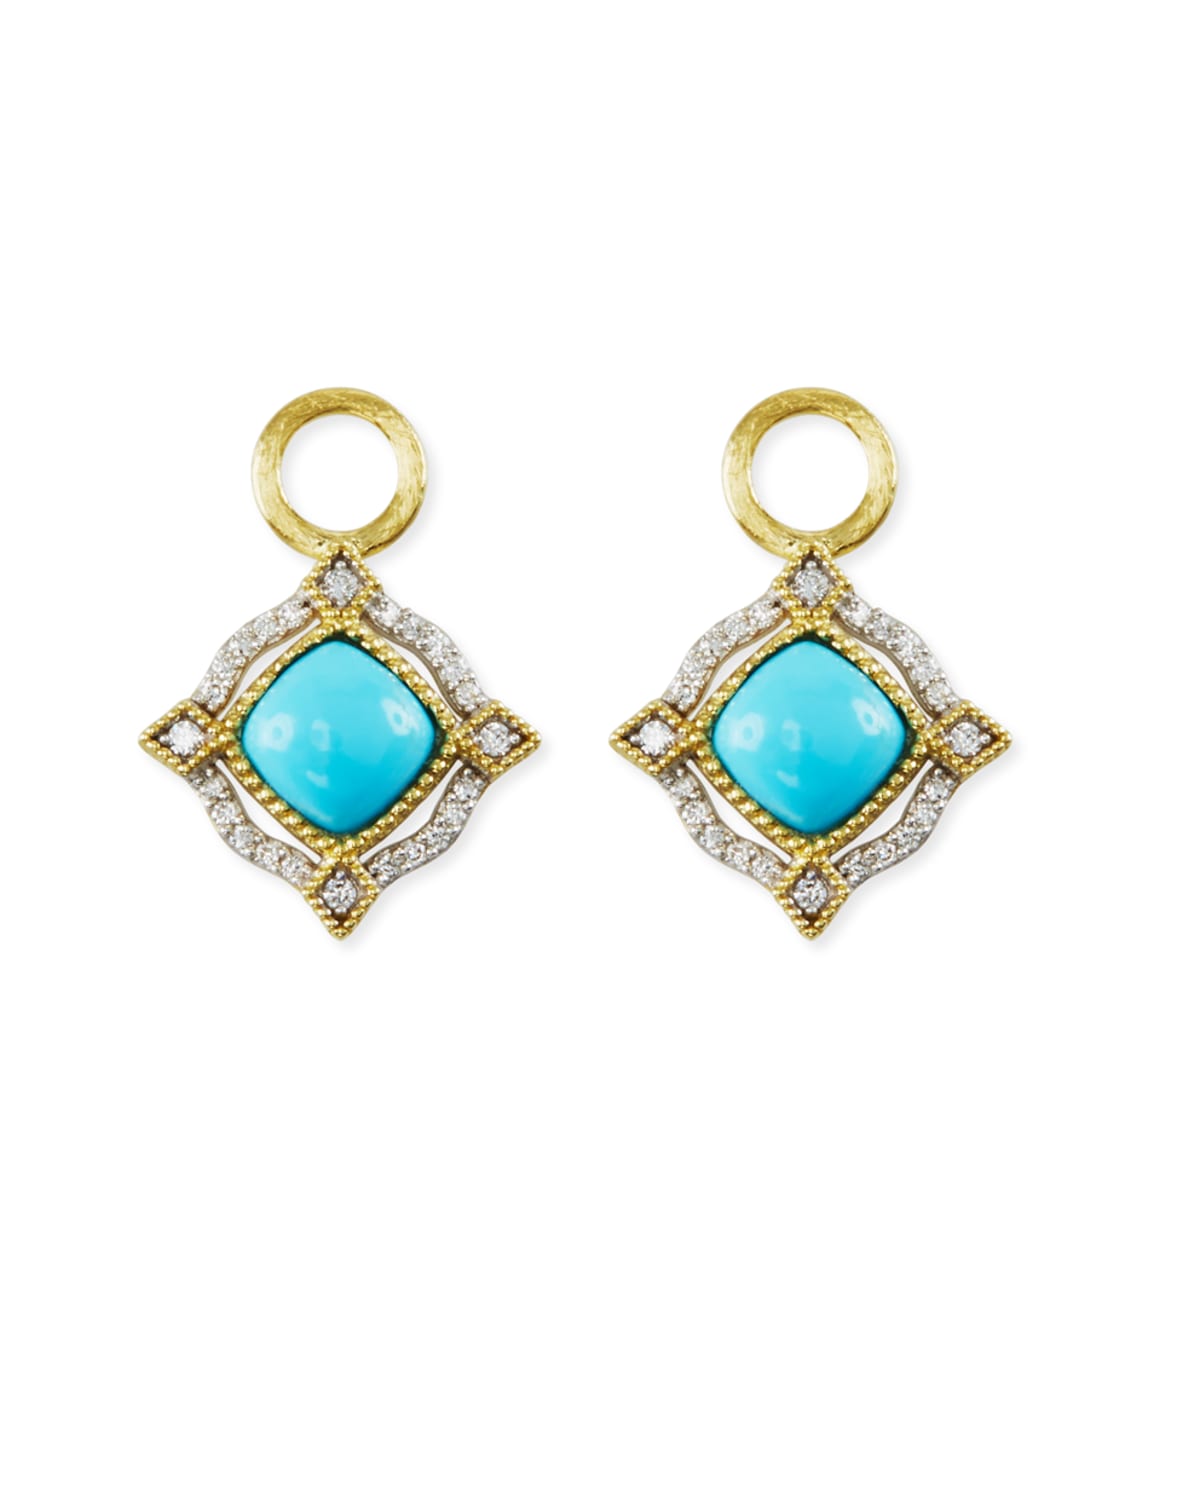 Lisse 18K Delicate Cushion Turquoise Earring Charms with Diamonds